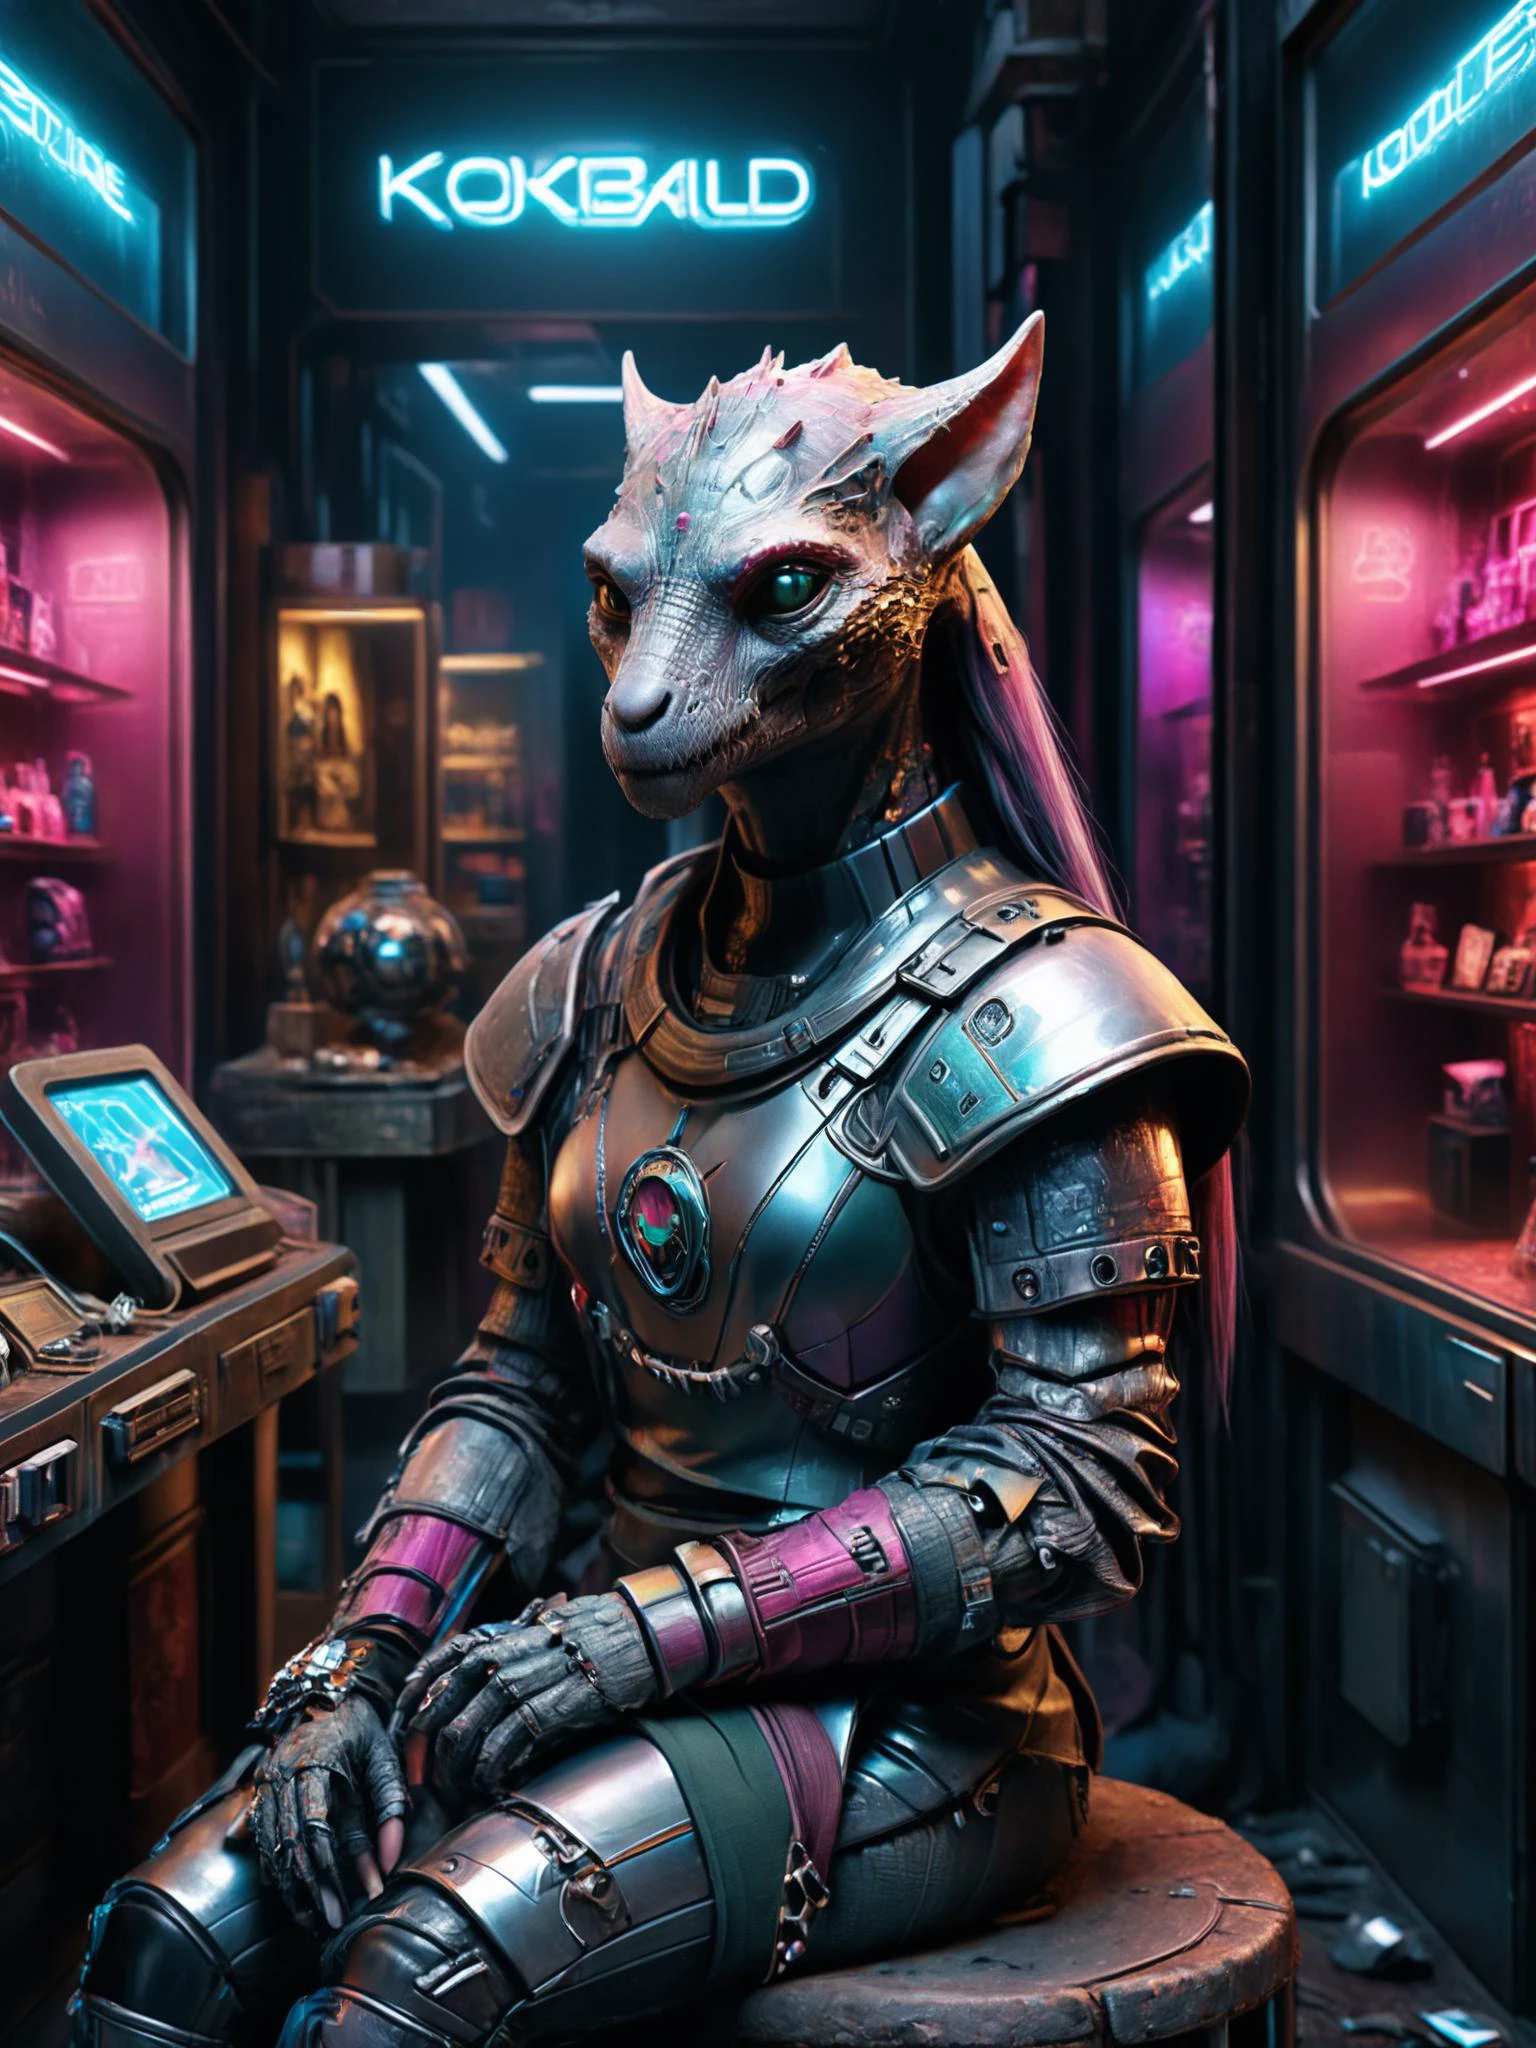 photorealistic, detailed digital illustration of a kobald , Cyberpunk fashion boutique with holographic displays in the background ais-abandz